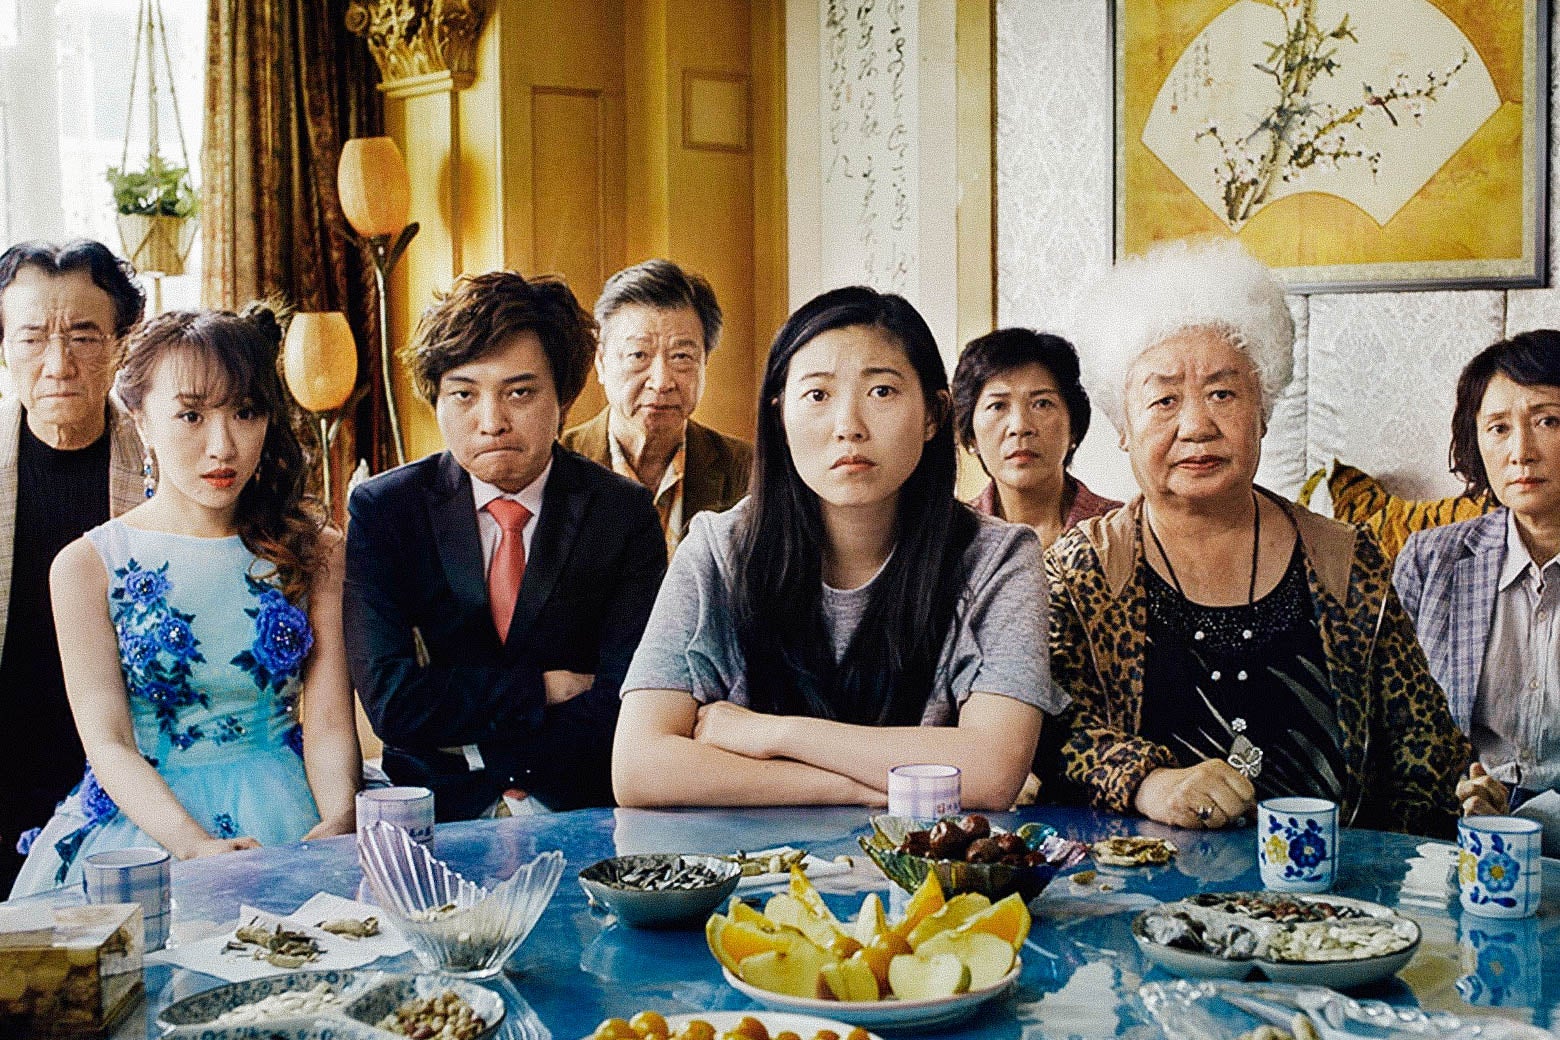 The cast of The Farewell sits at a table in a still from the movie.